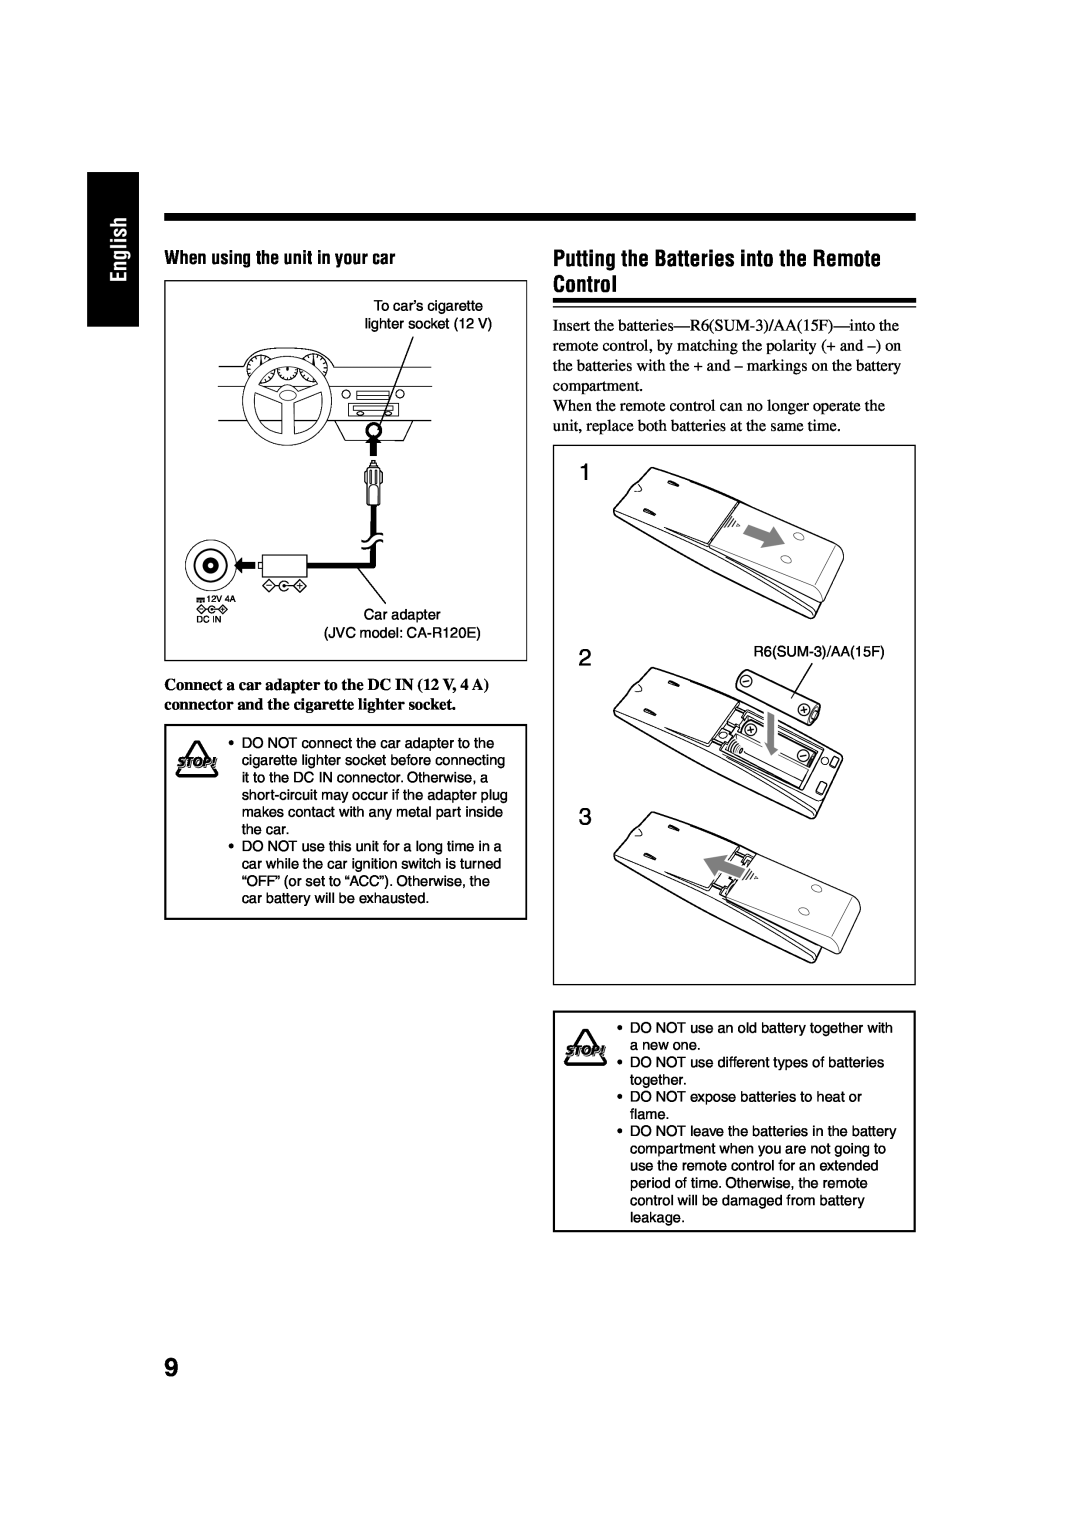 JVC UX-H33 manual Putting the Batteries into the Remote Control, English, When using the unit in your car 